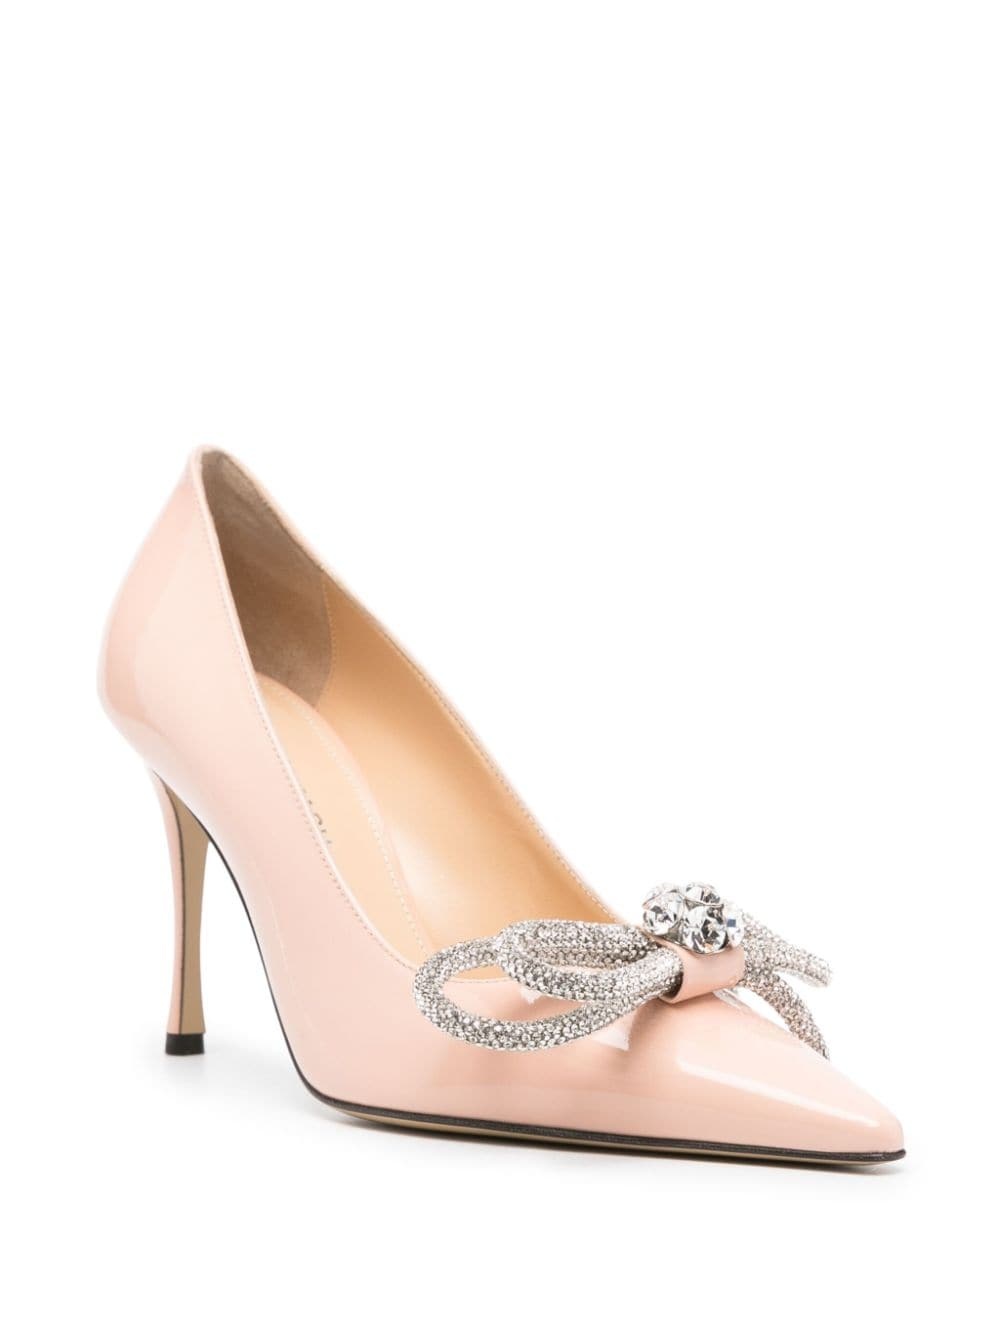 Double Bow embellished pumps - 2